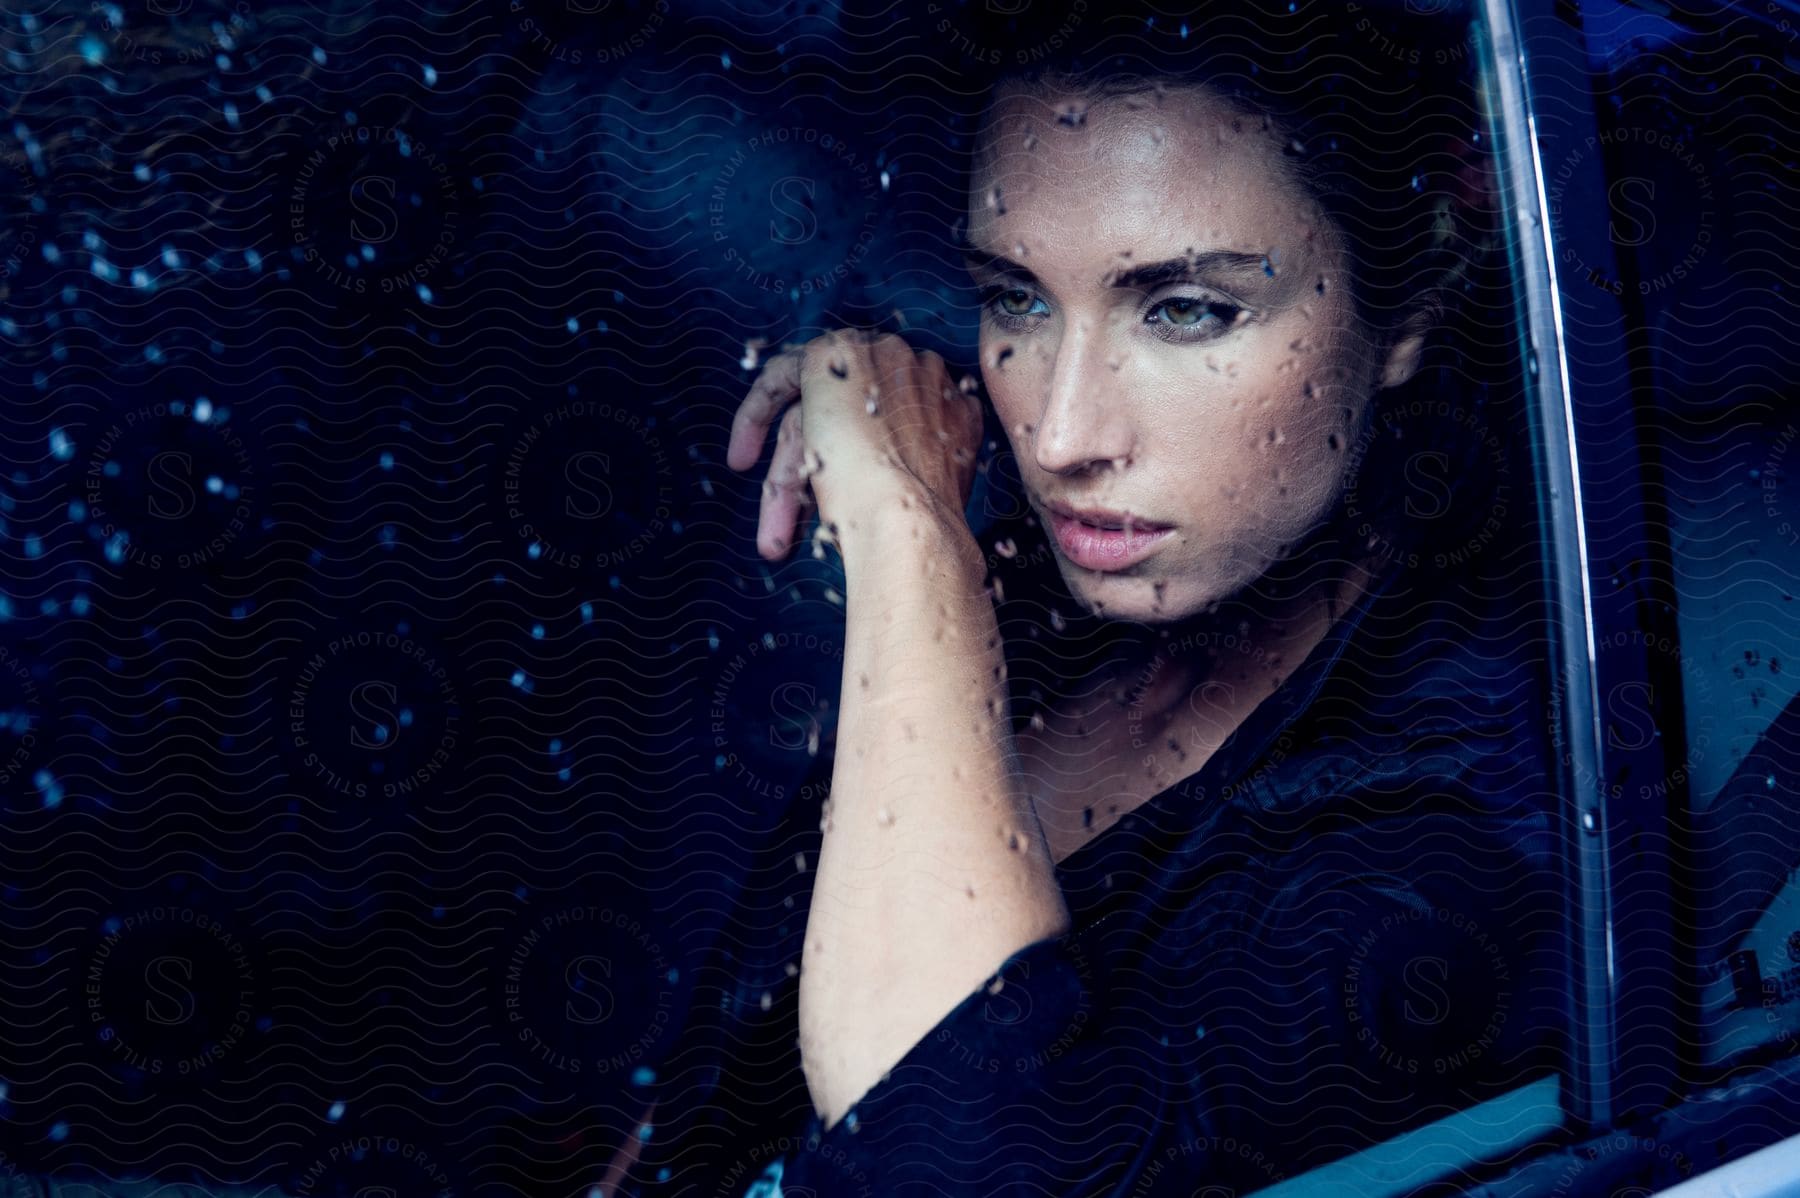 A person with black hair looking sad against a rainy car window